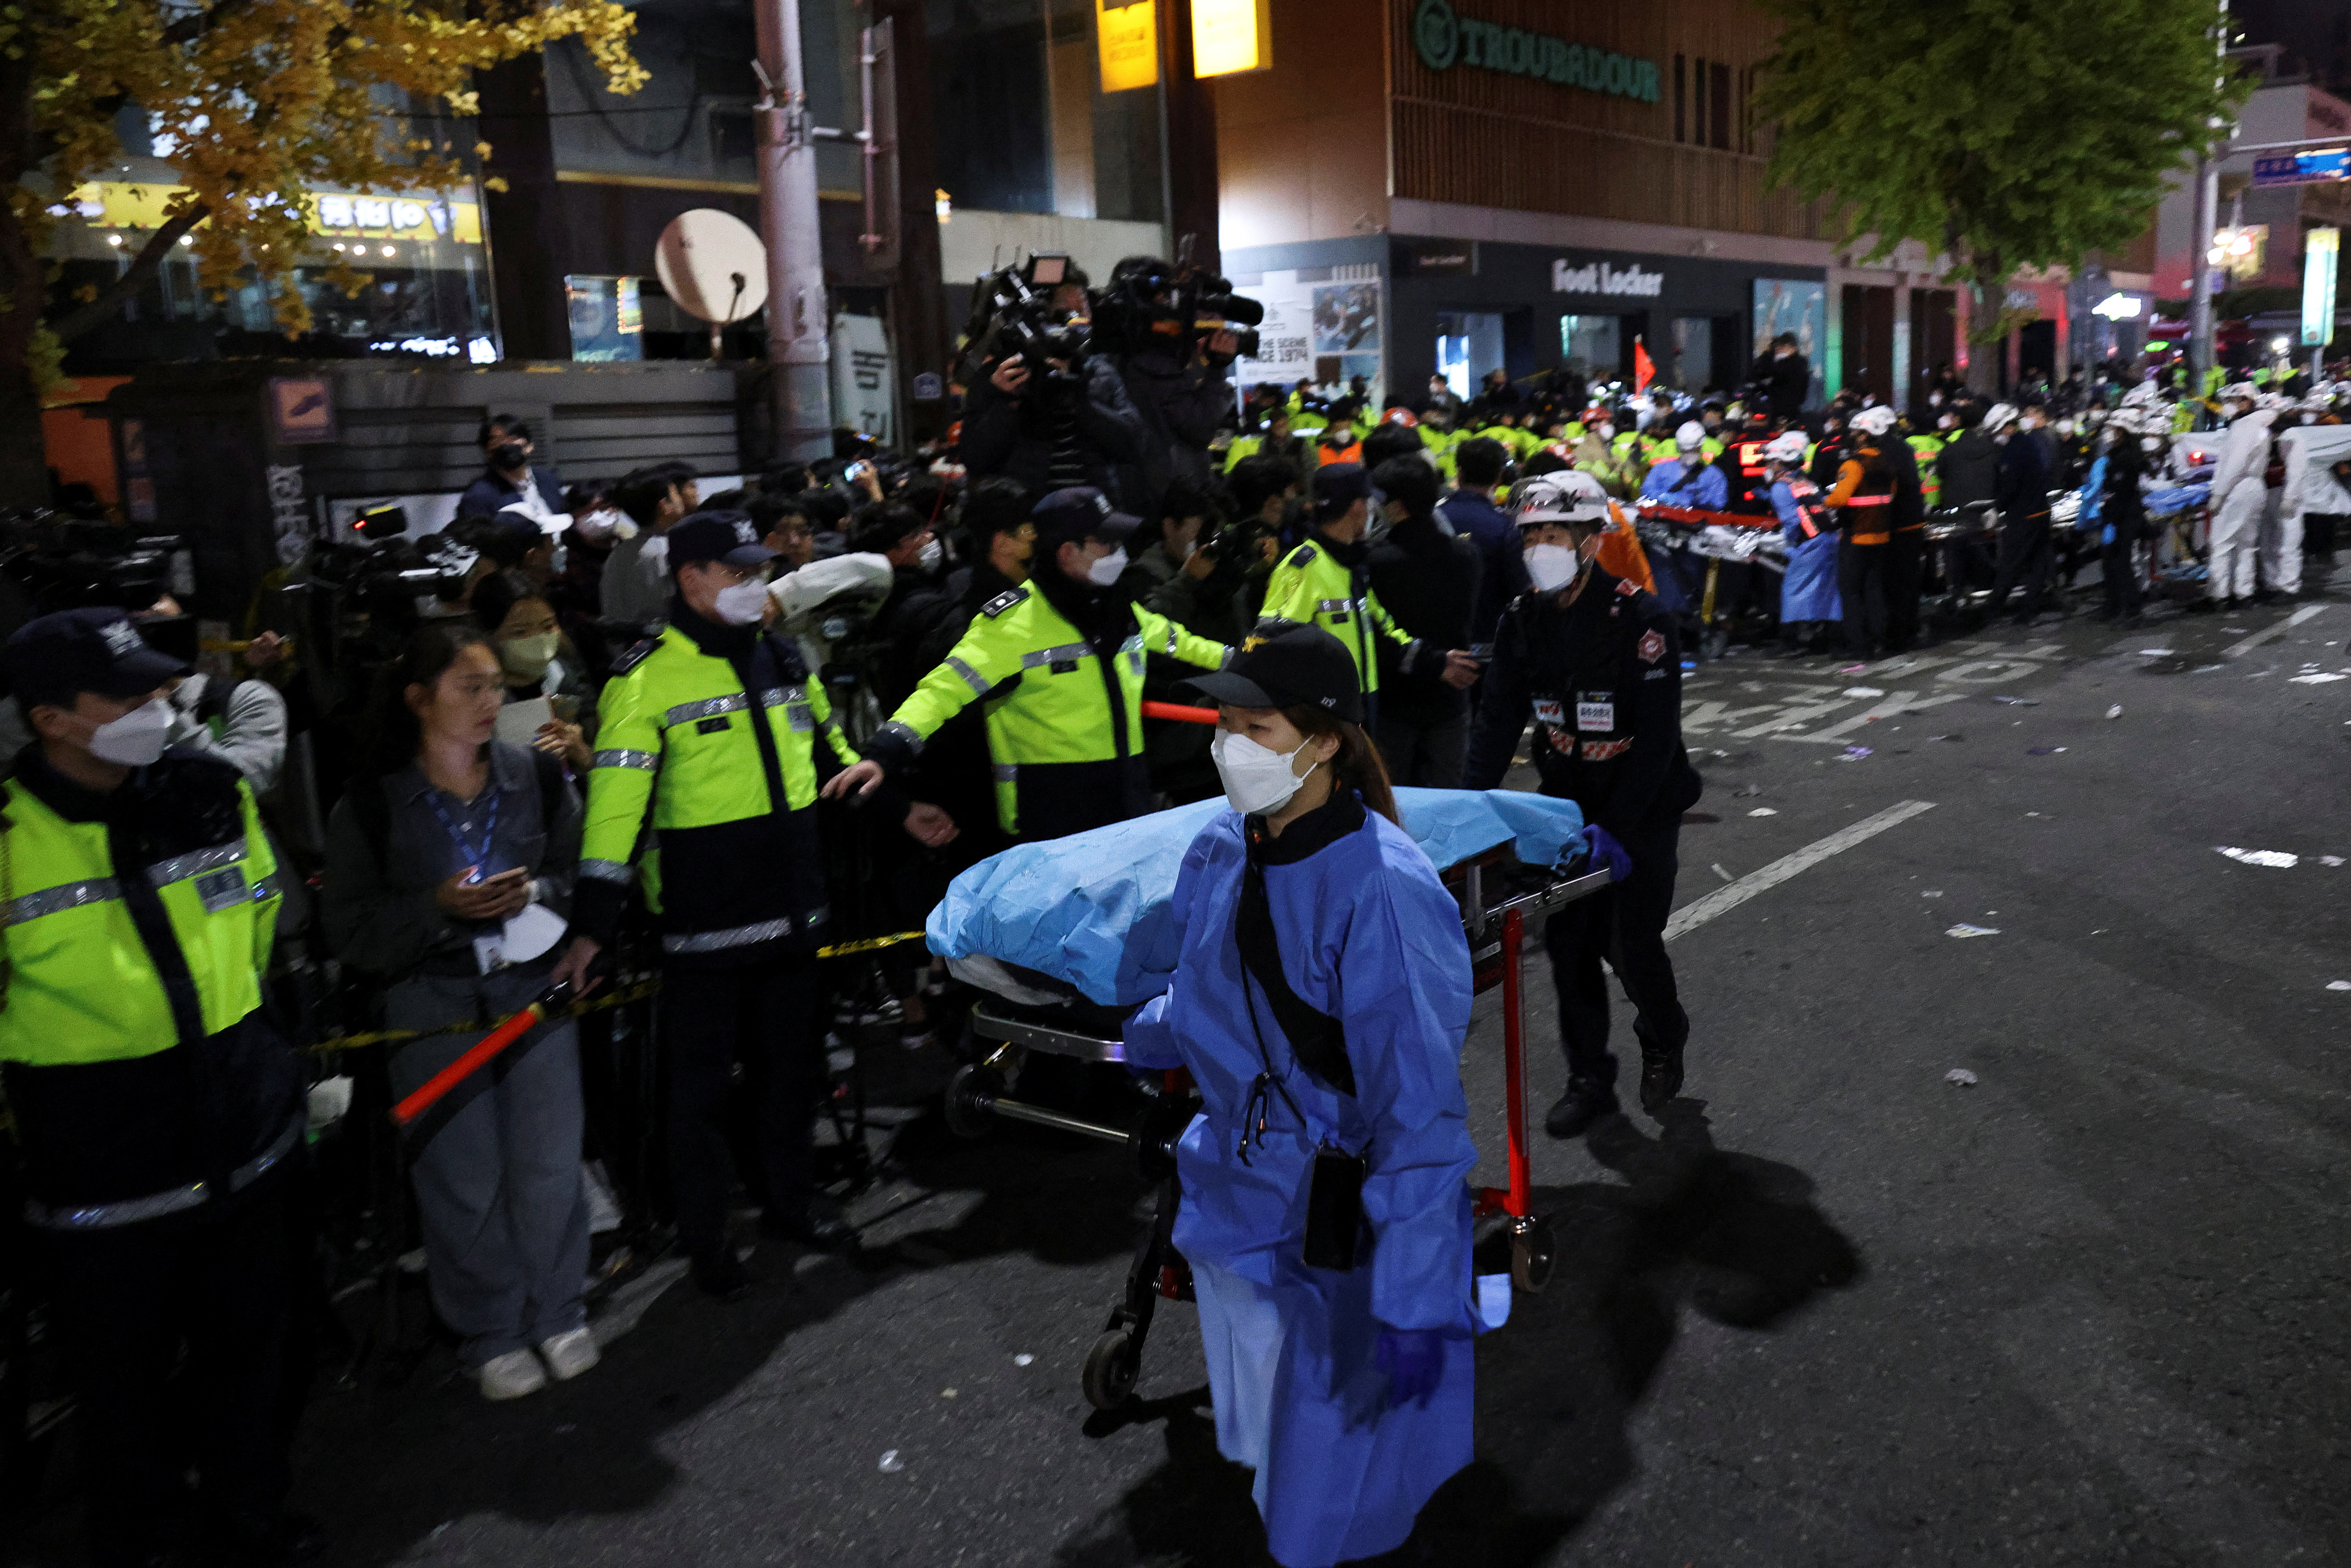 Authorities say people are believed to have been crushed to death after a large crowd began pushing in a narrow alley near the Hamilton Hotel, a major party venue in Seoul.